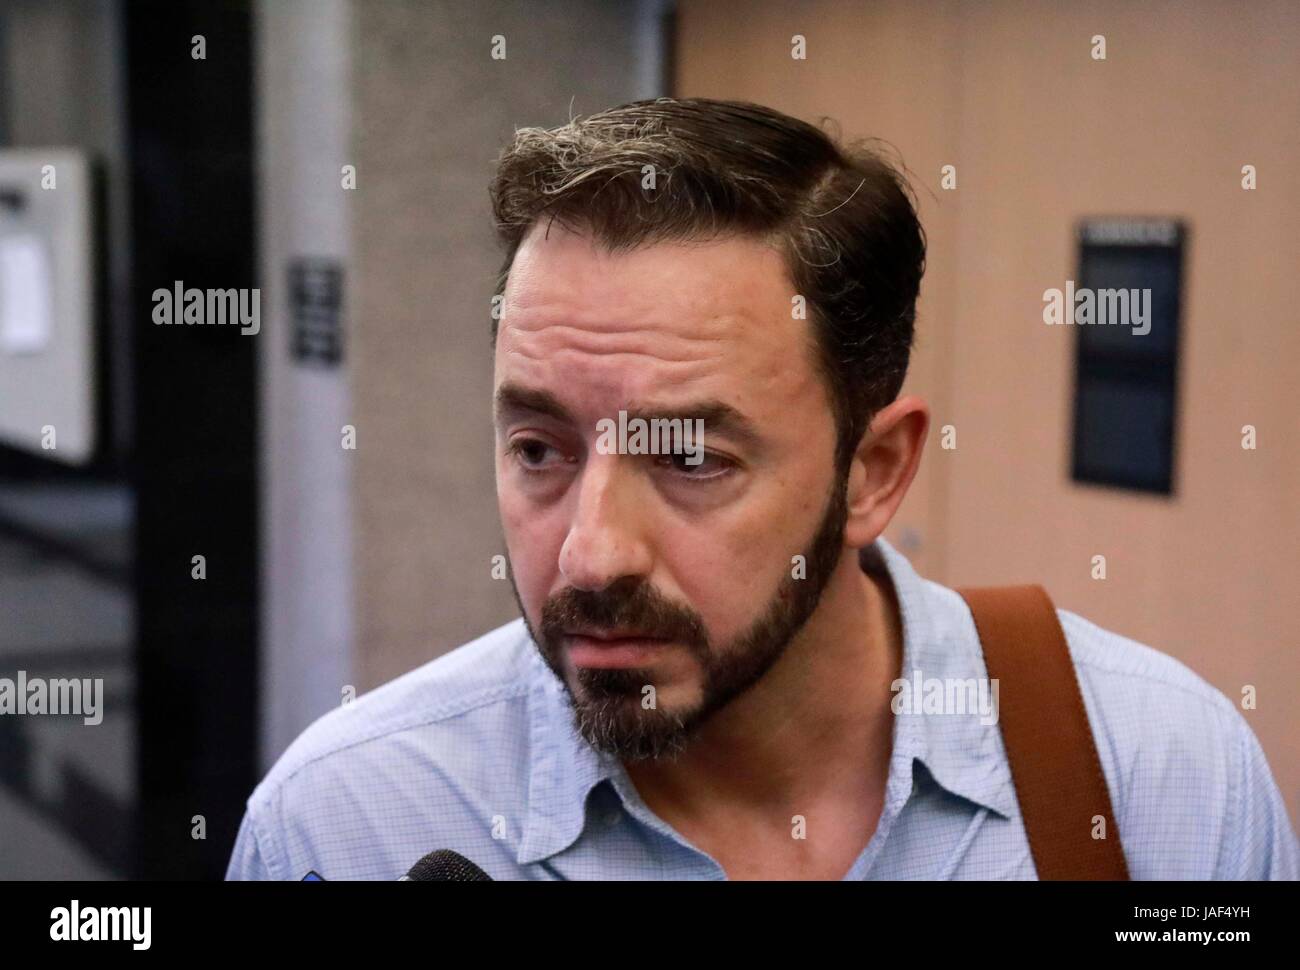 Florida, USA. 6th June, 2017. Radley Horwitz speaks with members of the media after his mother Donna Horwitz was found guilty of second-degree murder for the 2011 shooting death of her ex-husband, Lanny, Tuesday, June 6, 2017. Credit: Bruce R. Bennett/The Palm Beach Post/ZUMA Wire/Alamy Live News Stock Photo